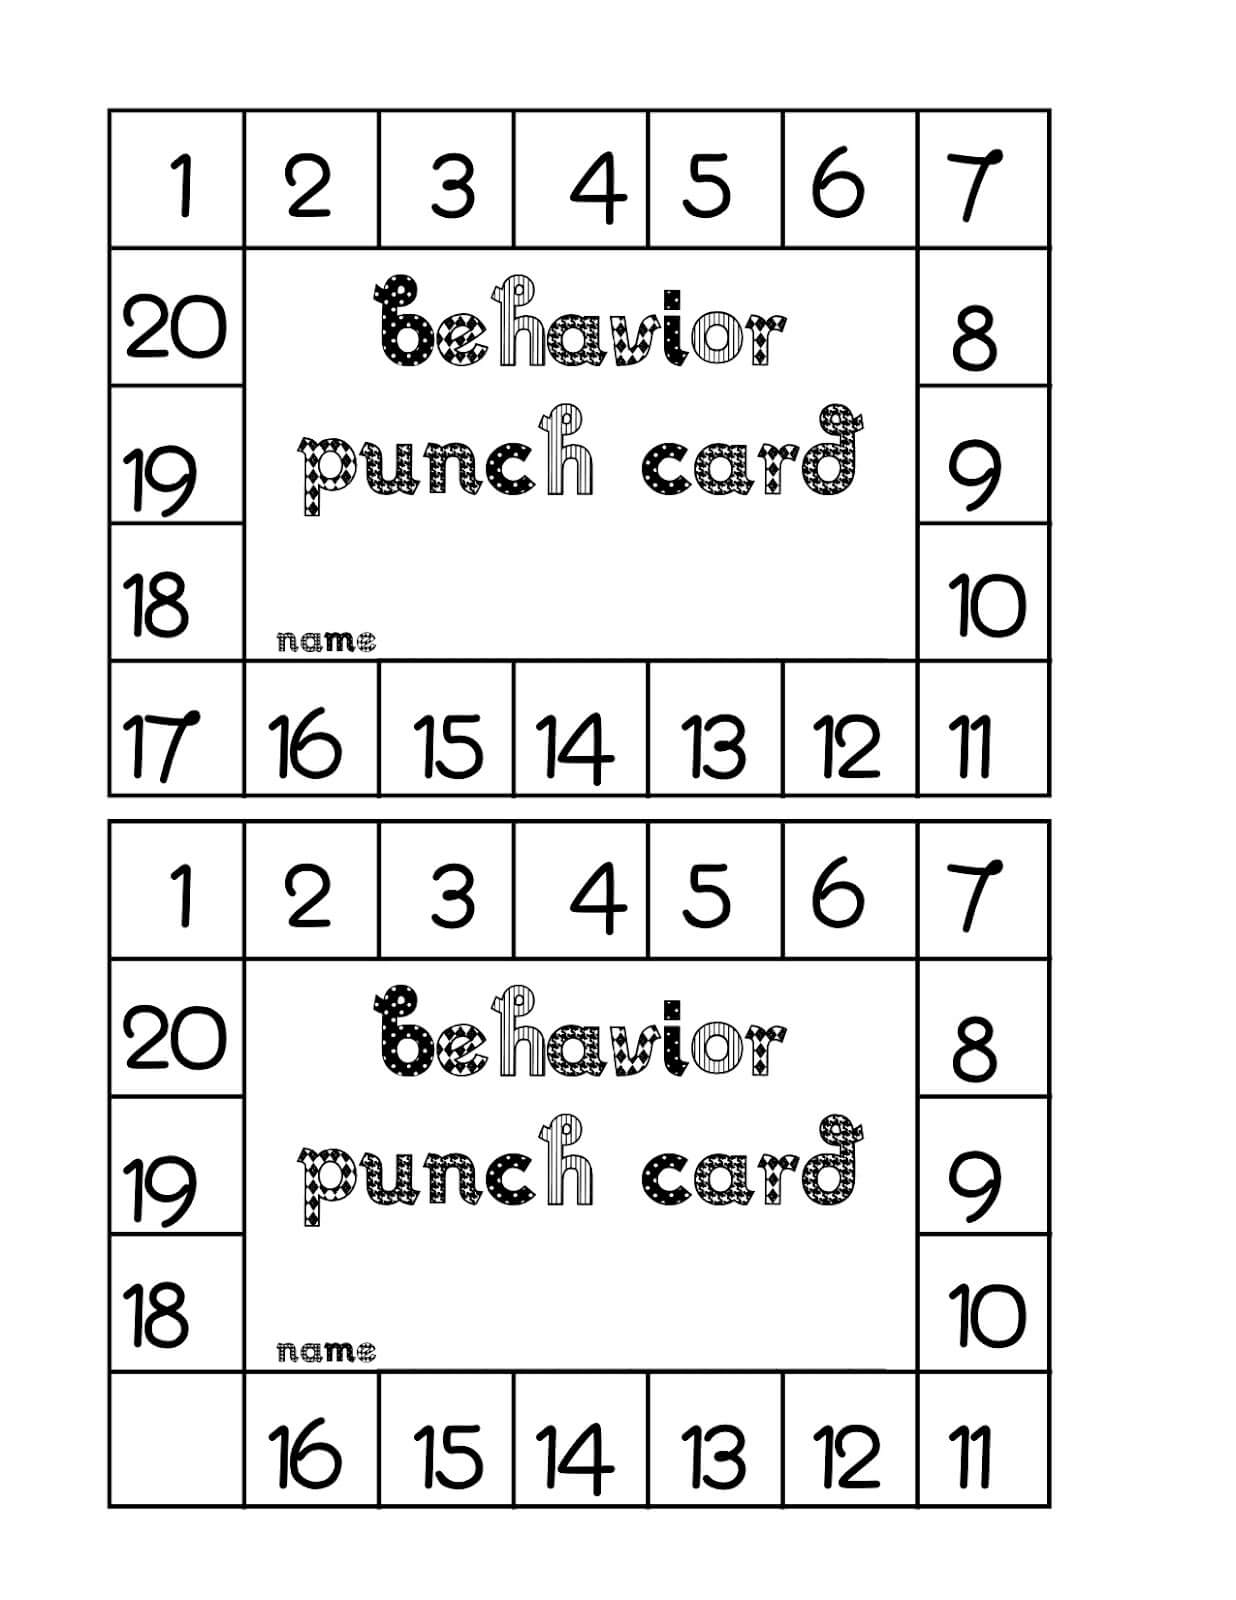 Punch Card Template Free ] - Free Printable Punch Card Pertaining To Free Printable Punch Card Template